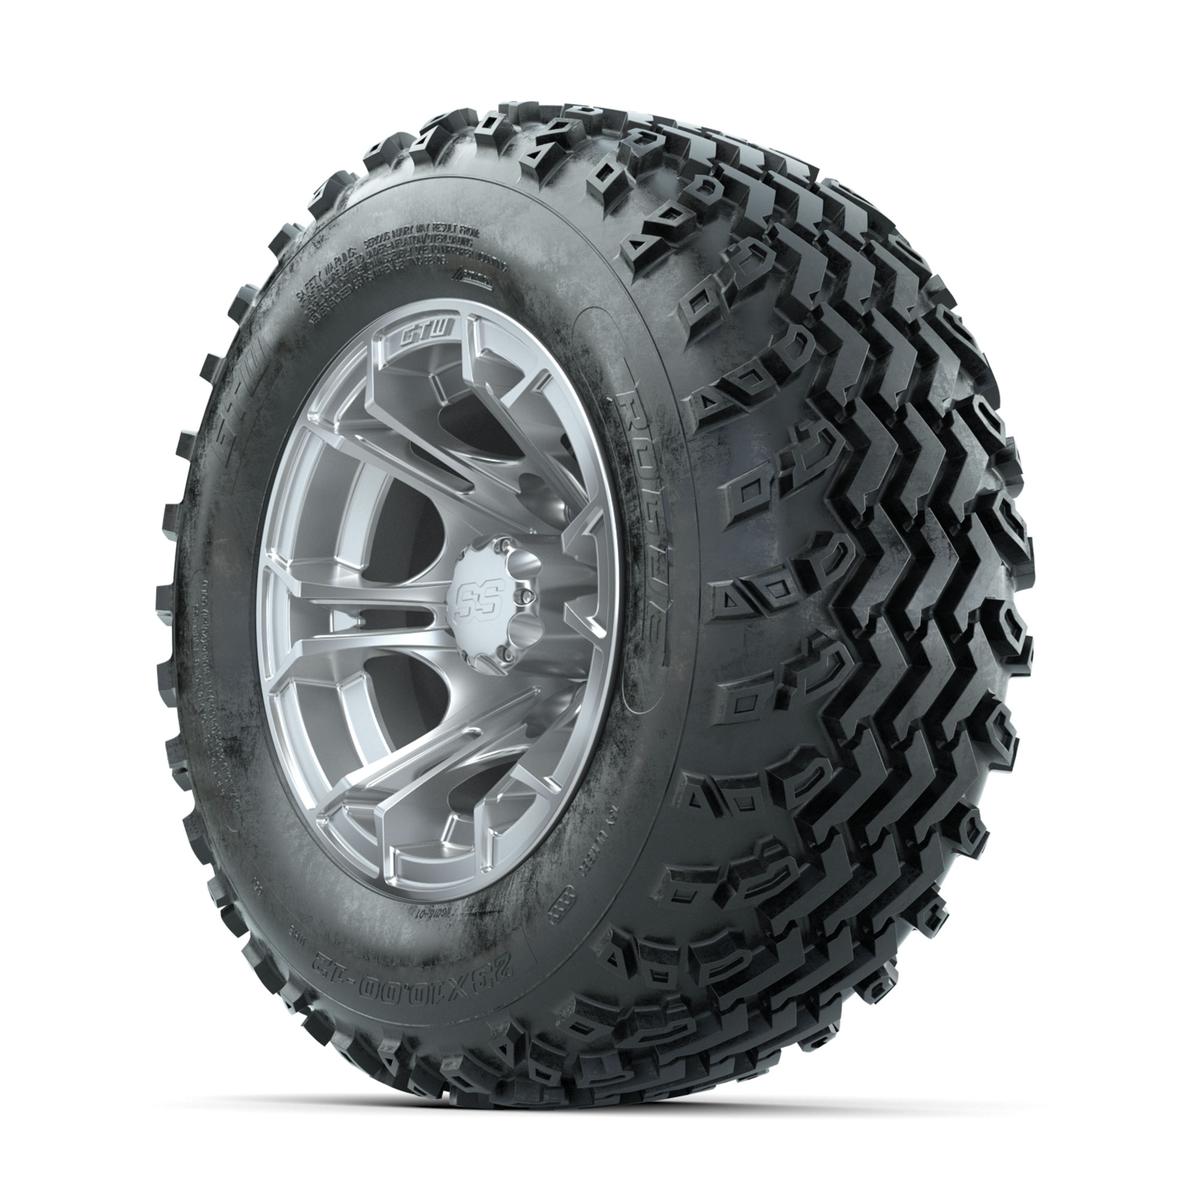 GTW Spyder Silver 12 in Wheels with 23x10.00-12 Rogue All Terrain Tires – Full Set